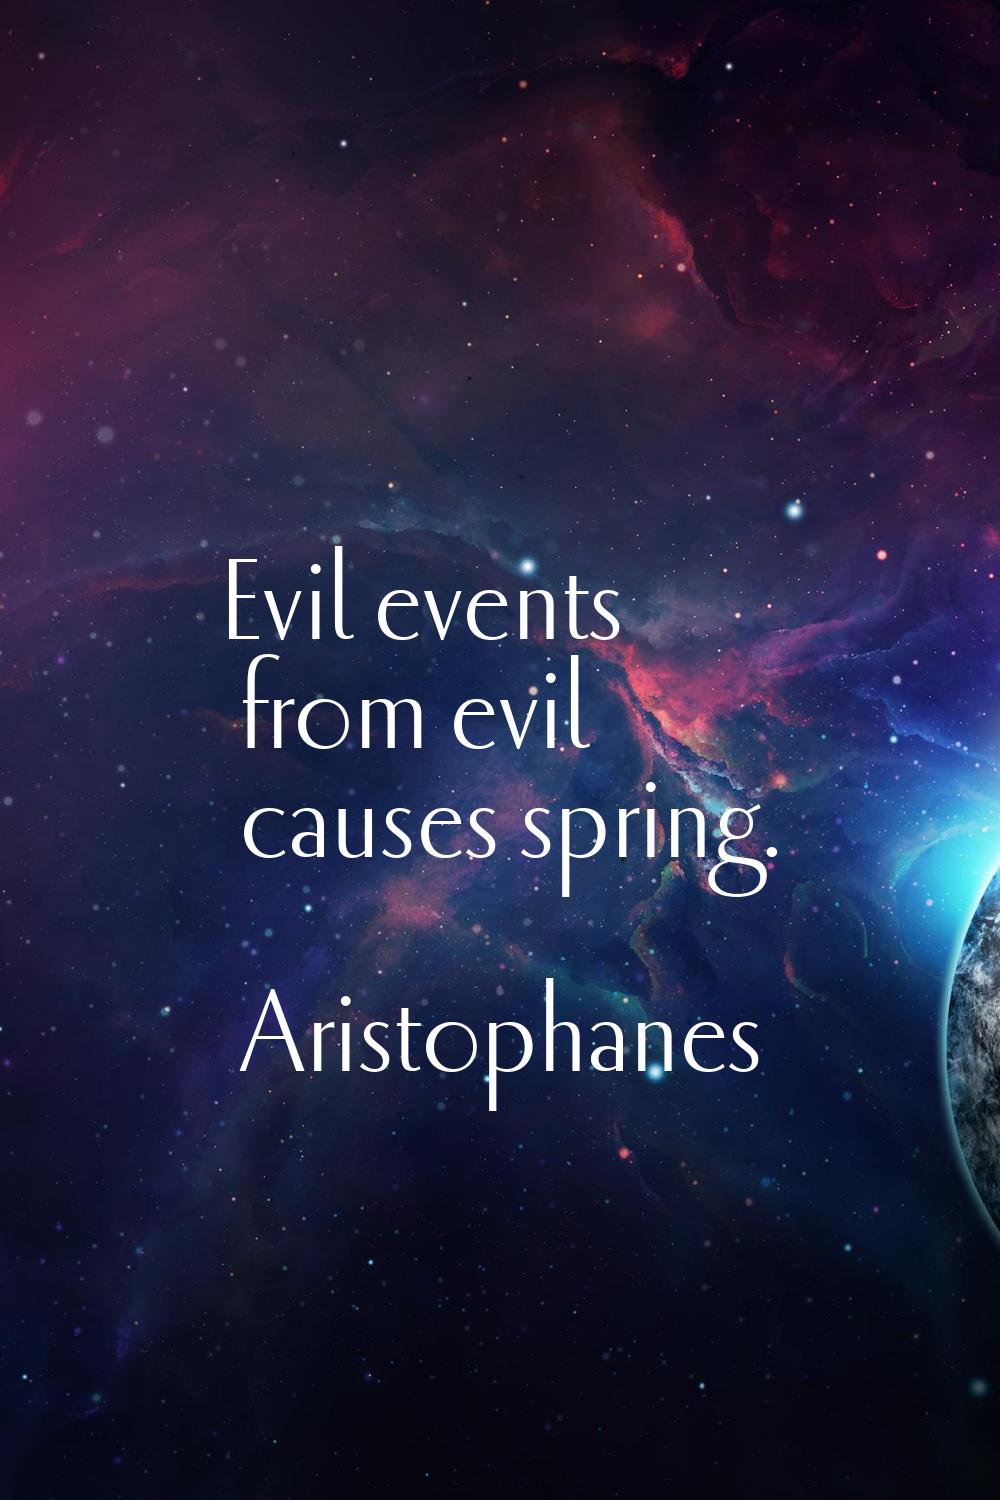 Evil events from evil causes spring.